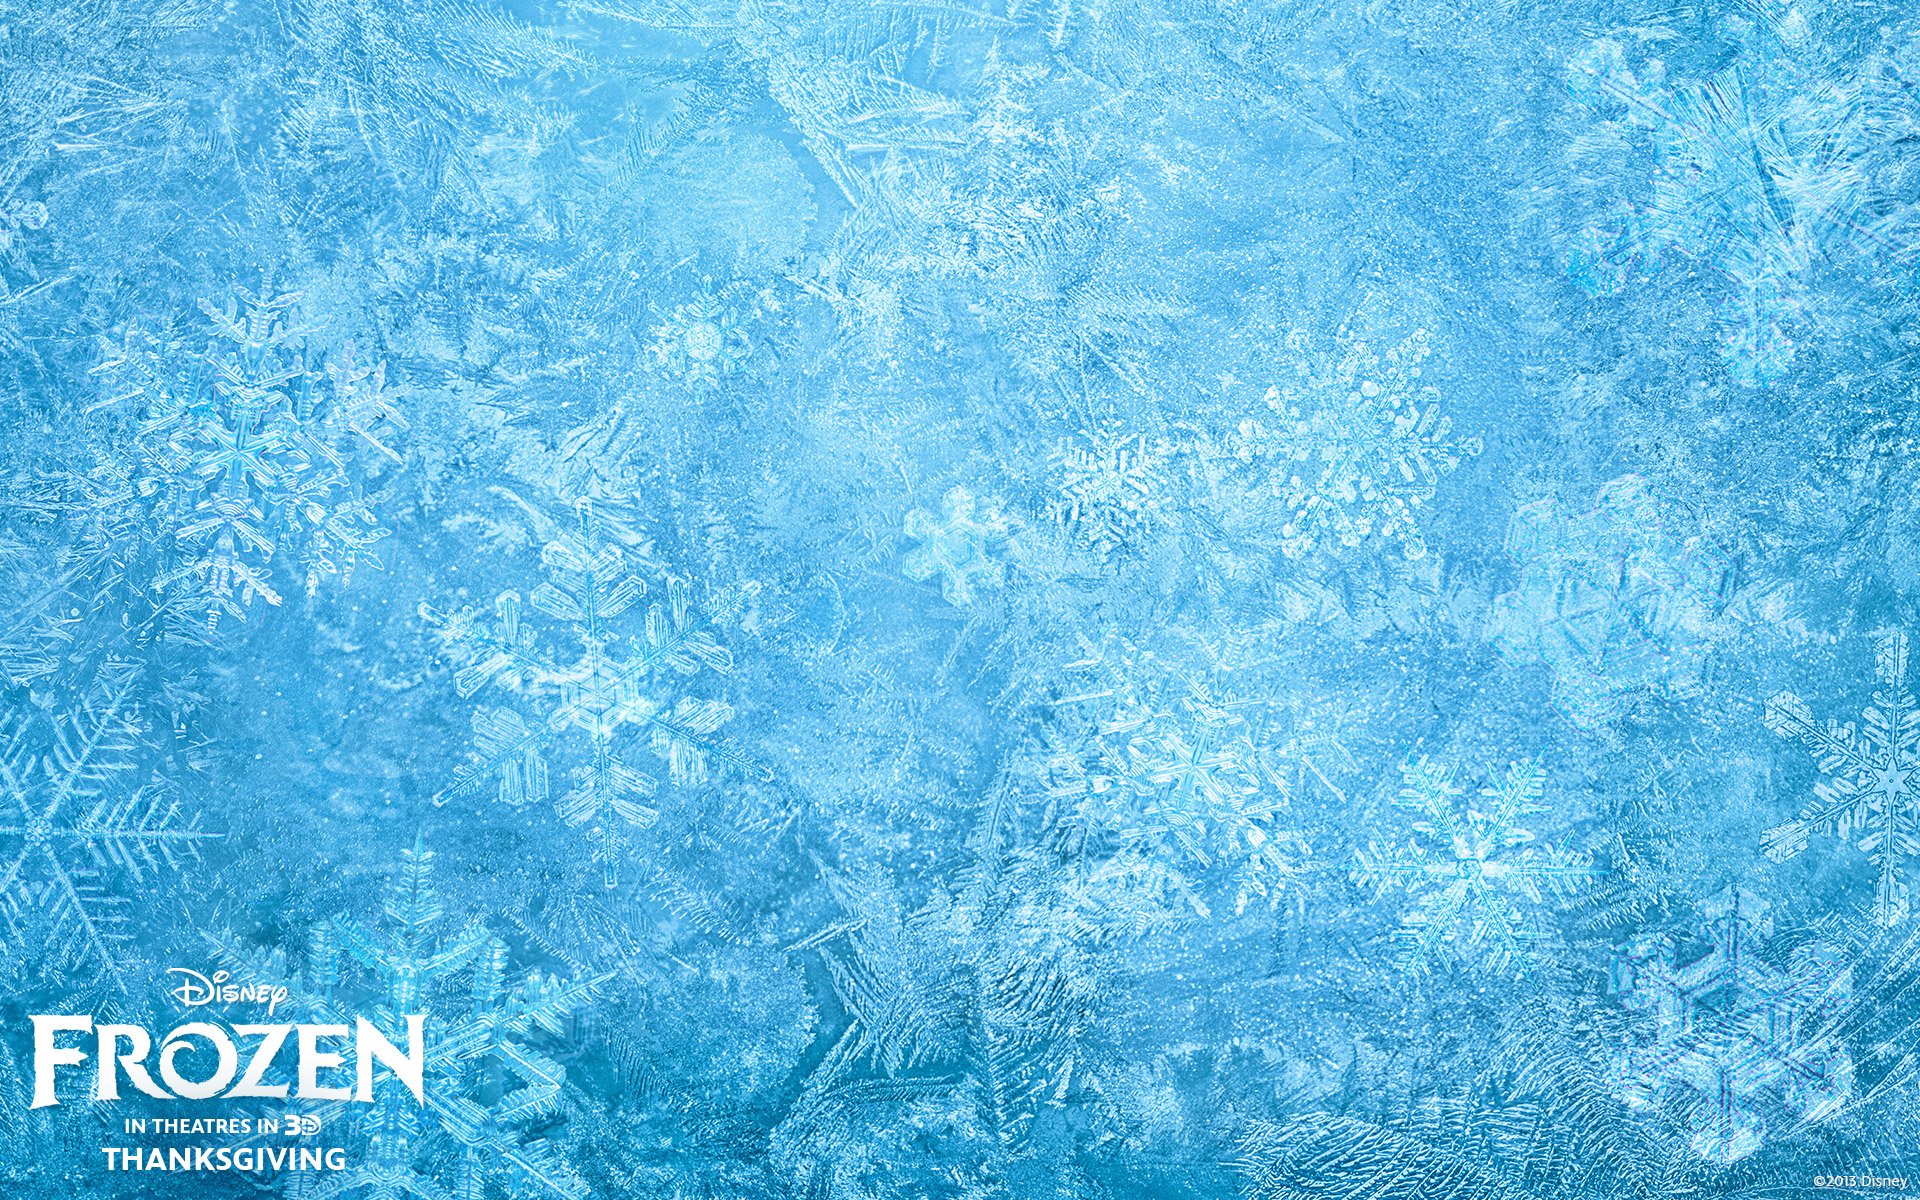  Disneys Frozen CG animated movie wallpaper image background picture